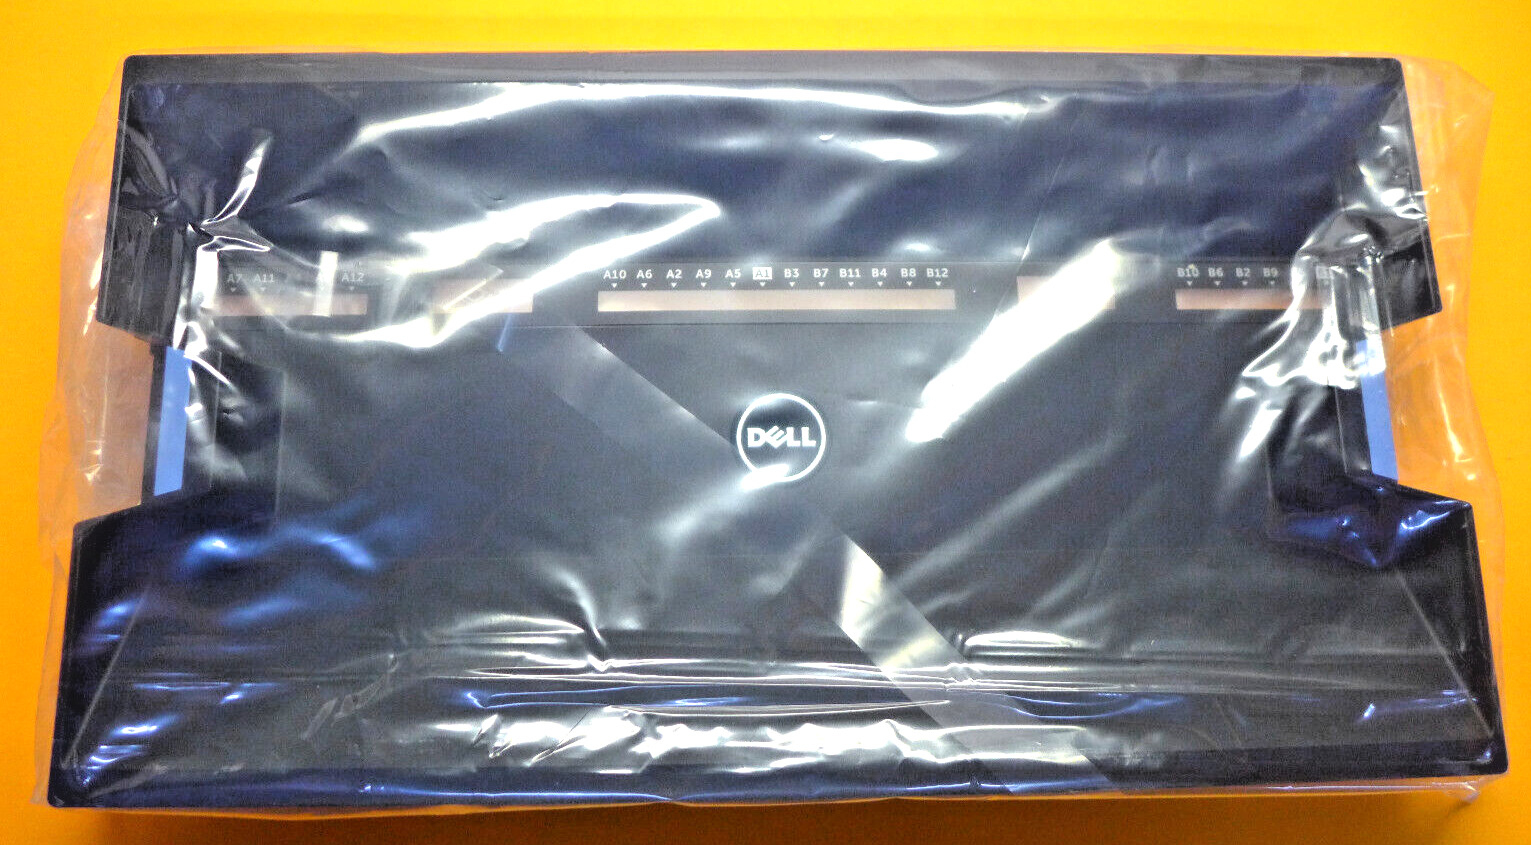 New Dell Poweredge R820 Server Processor CPU Cooling Cover Baffle Shroud KFP1W